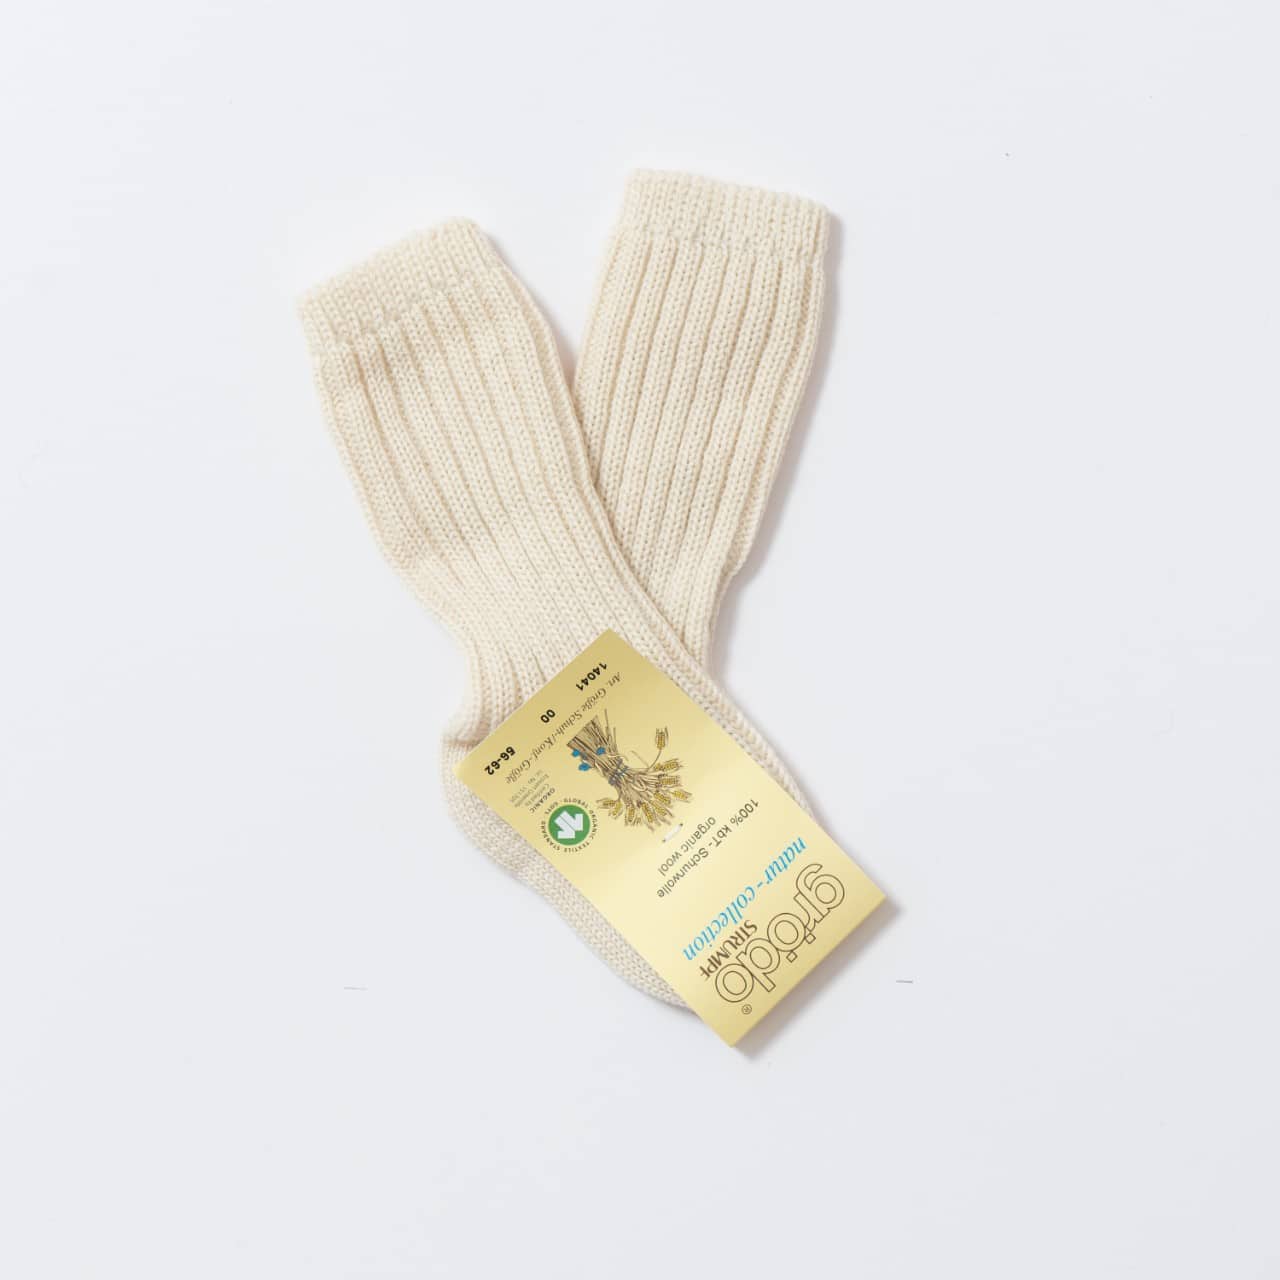 Chaussons, chaussettes & collants en laine mérinos bio • Ode to Wool